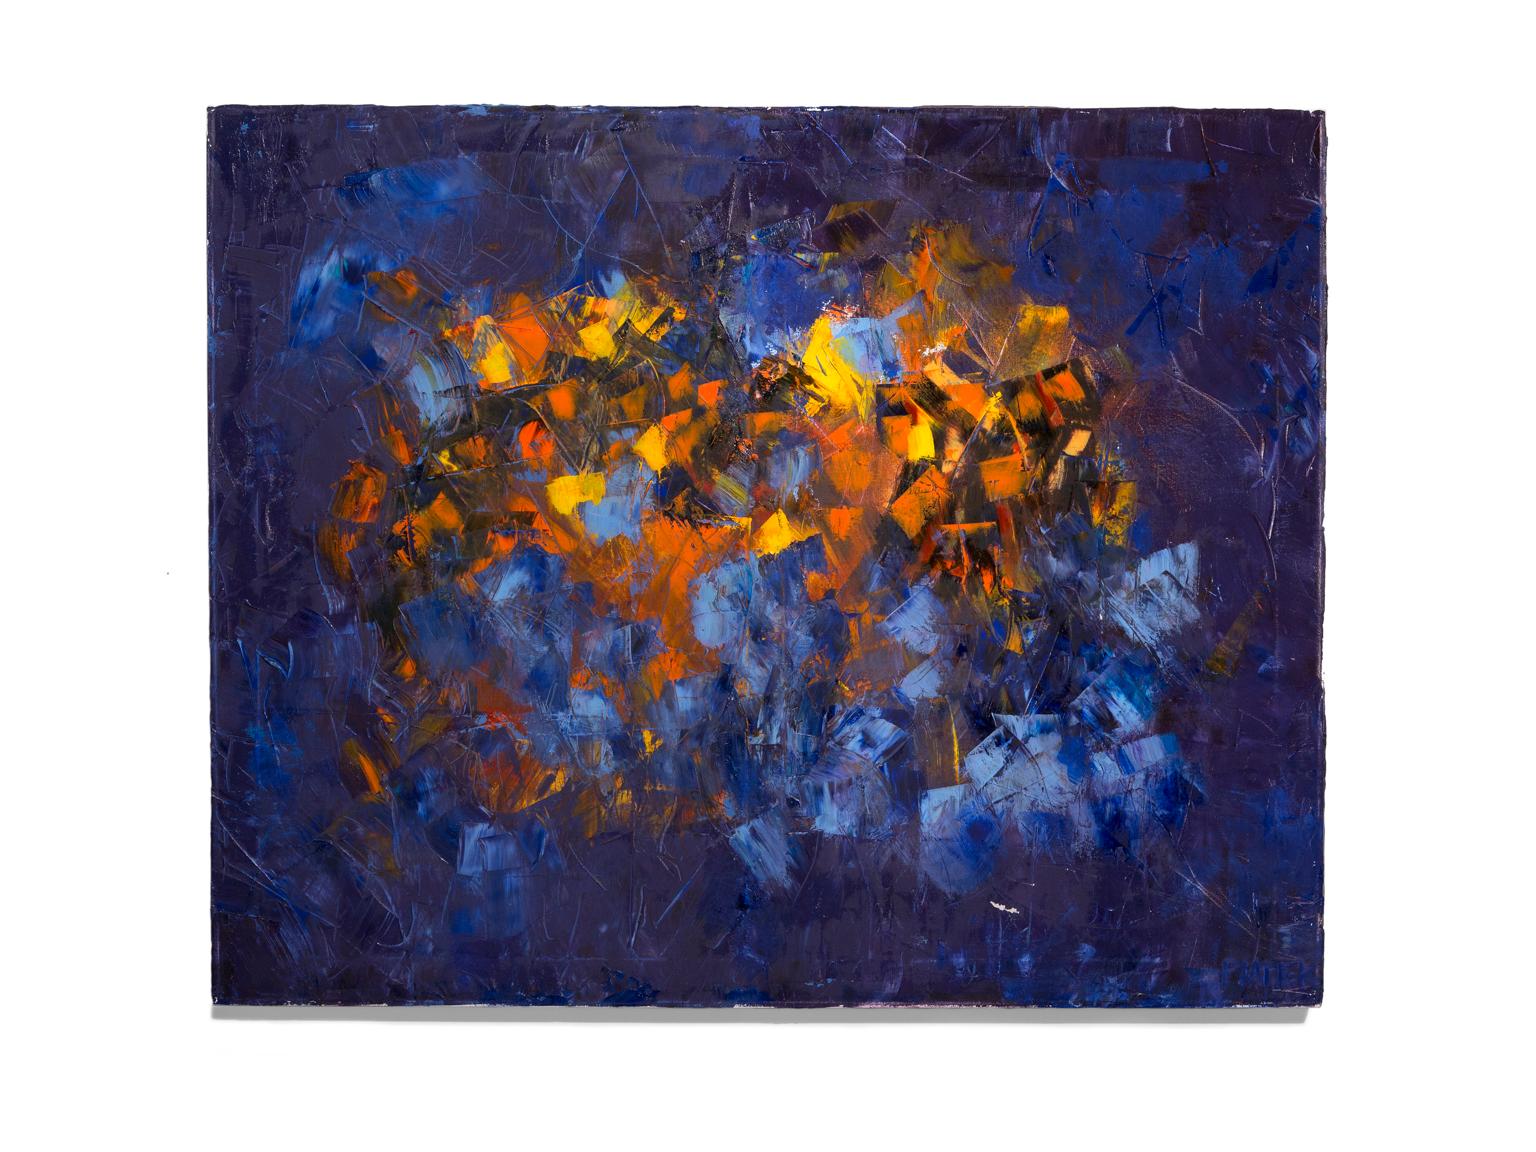 Robert Piatek Abstract Painting - "In the Beginning" Abstract, Brilliant Colors of Blue, Red, Yellow, Oil